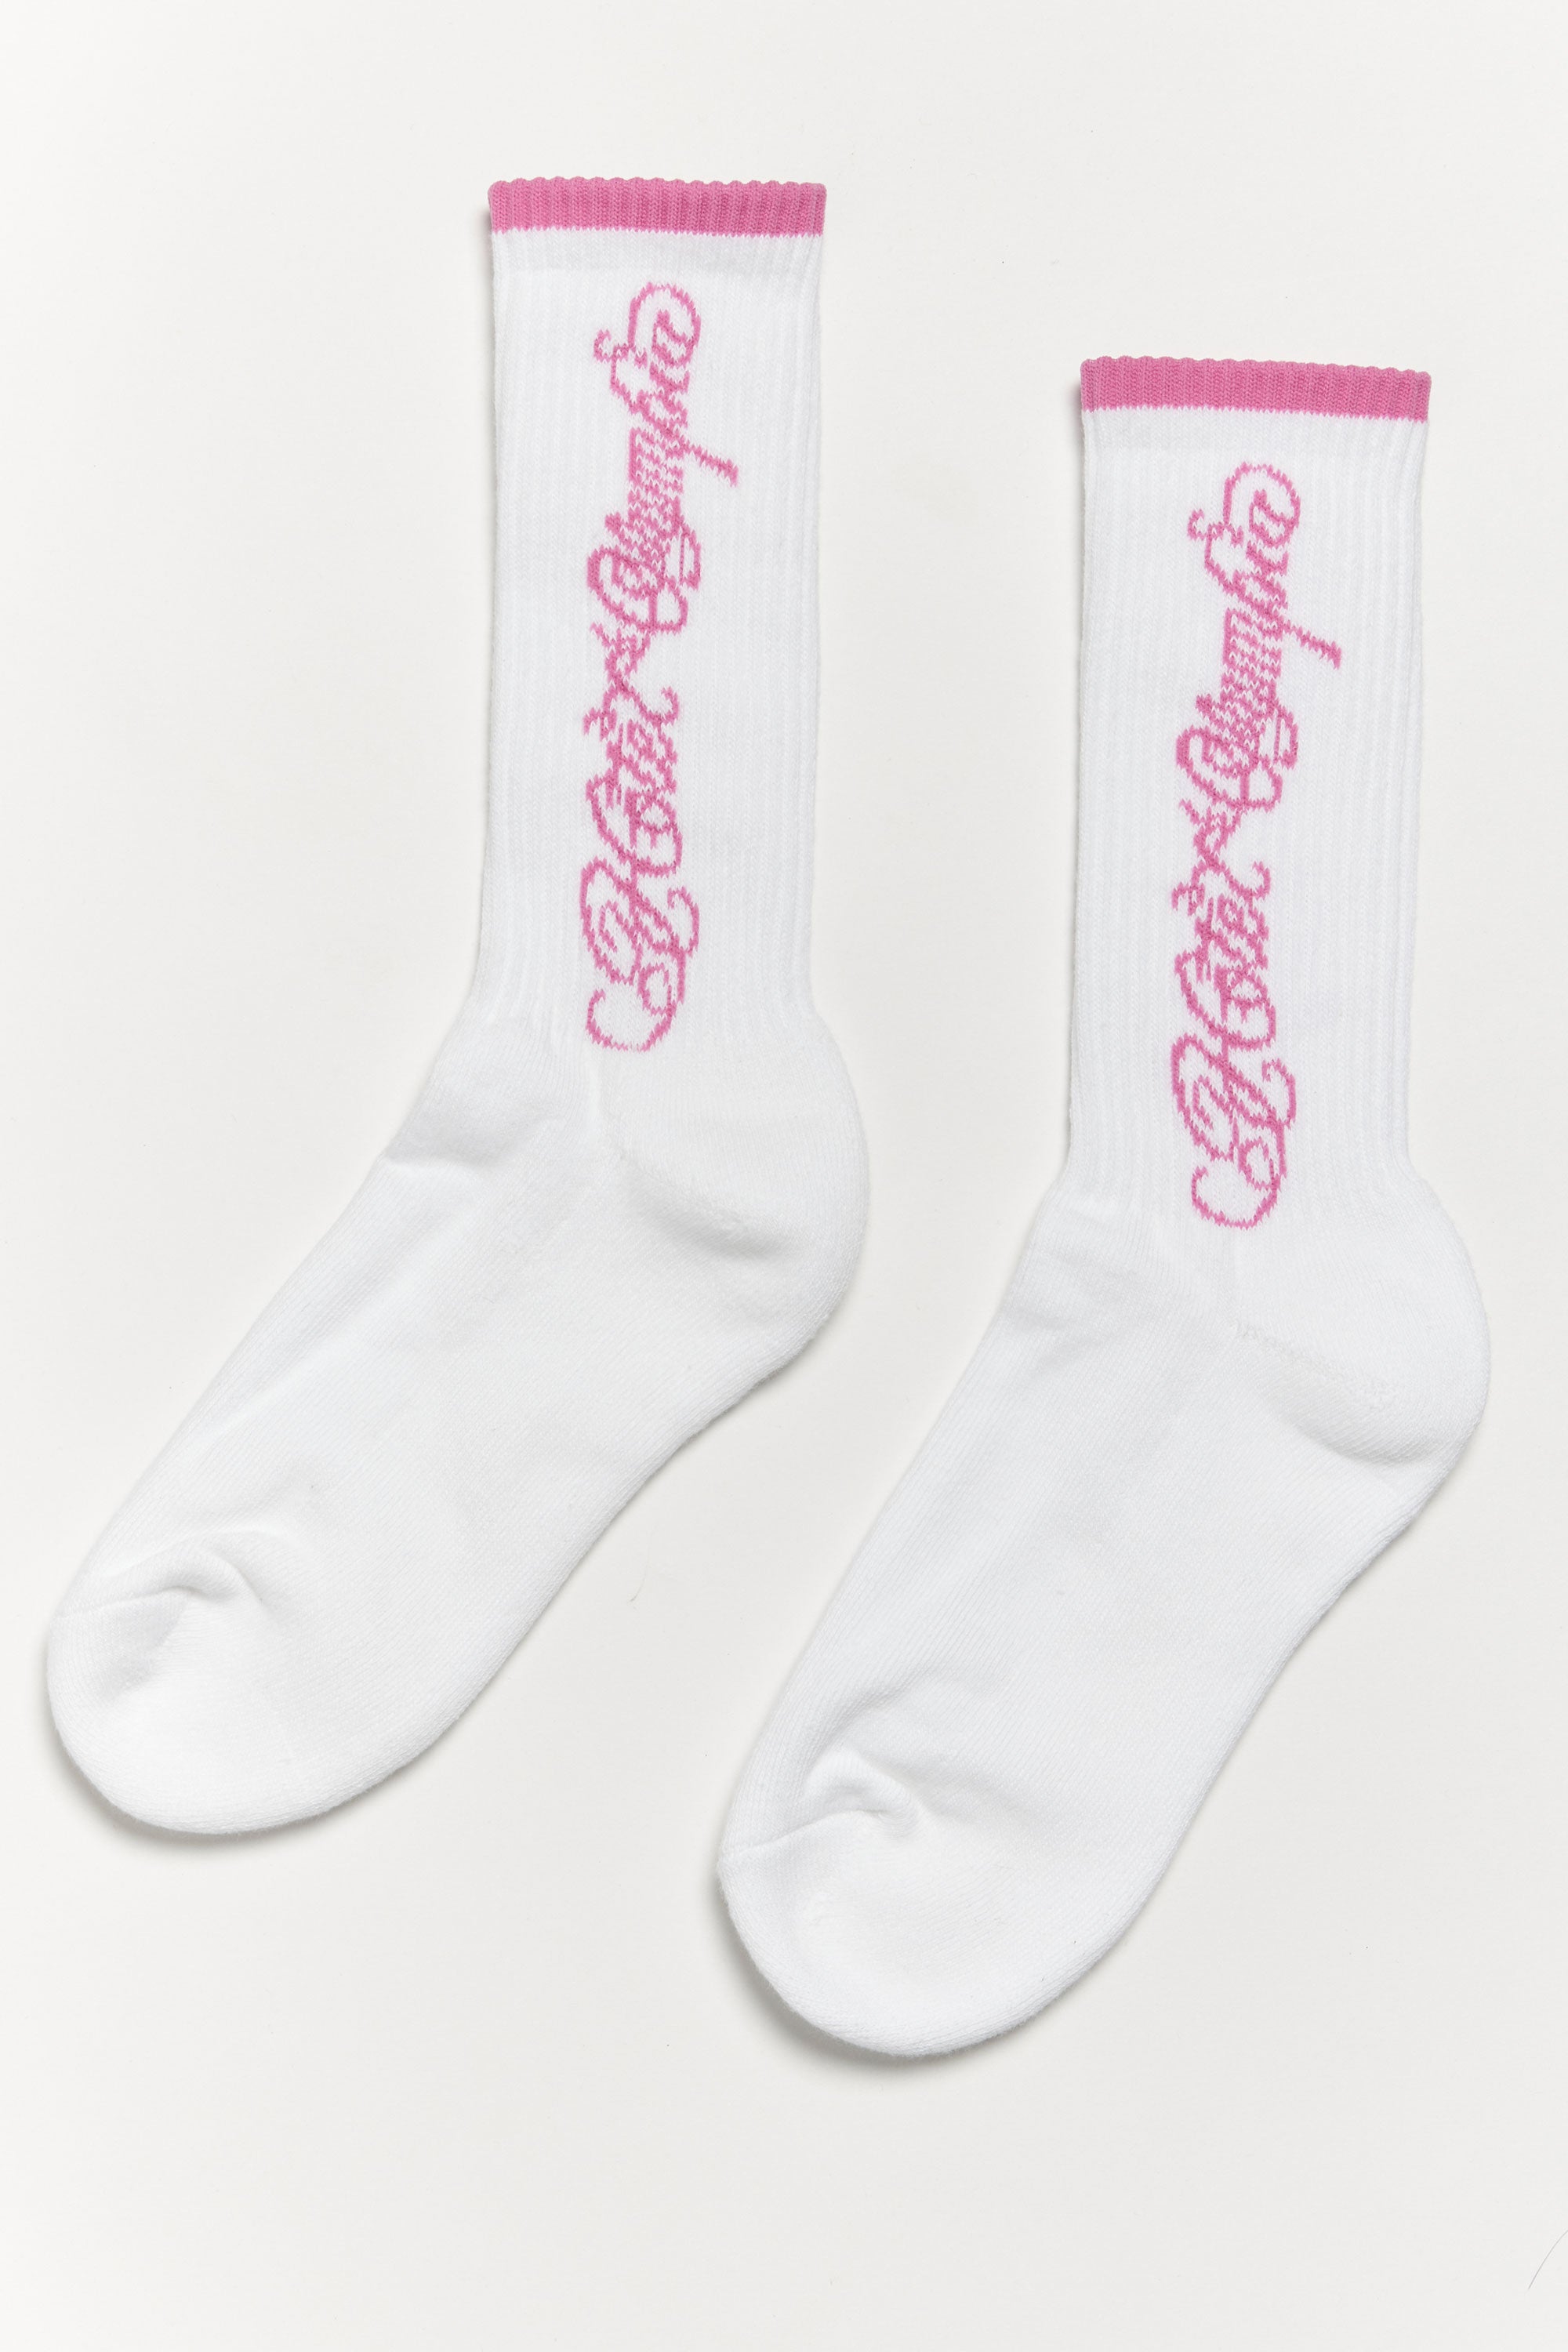 The HOTEL OLYMPIA - H.O. SPORT SOCKS WHITE available online with global shipping, and in PAM Stores Melbourne and Sydney.